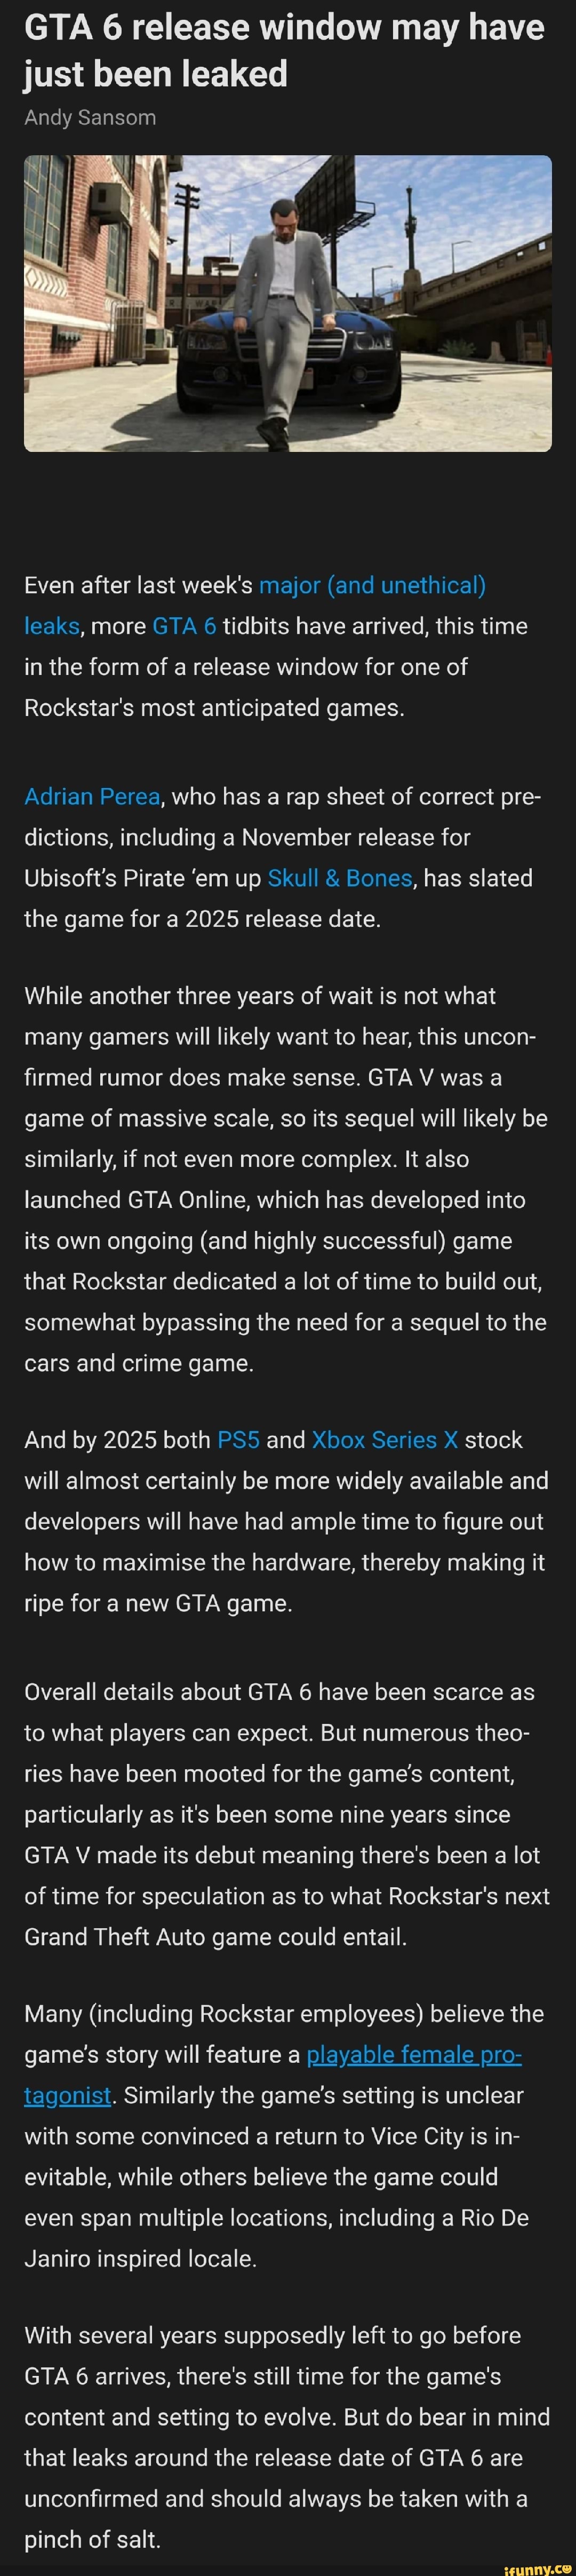 GTA 6's rumoured new release window is much closer, but it comes at a cost